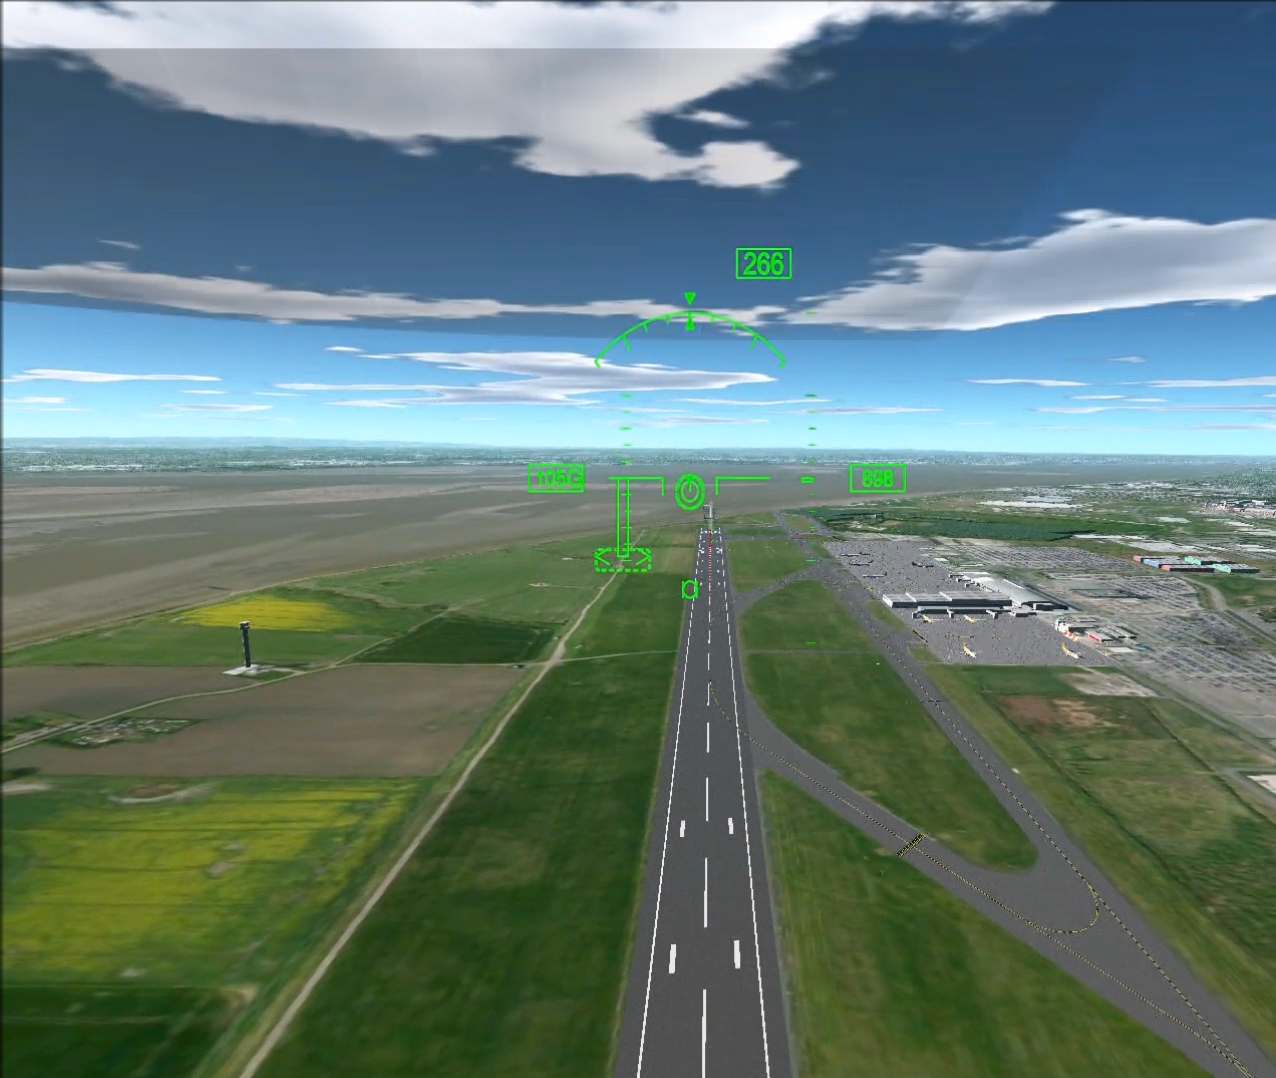 Coming down in a simulated autorotation into Liverpool John Lennon International Airport with guidance symbology on